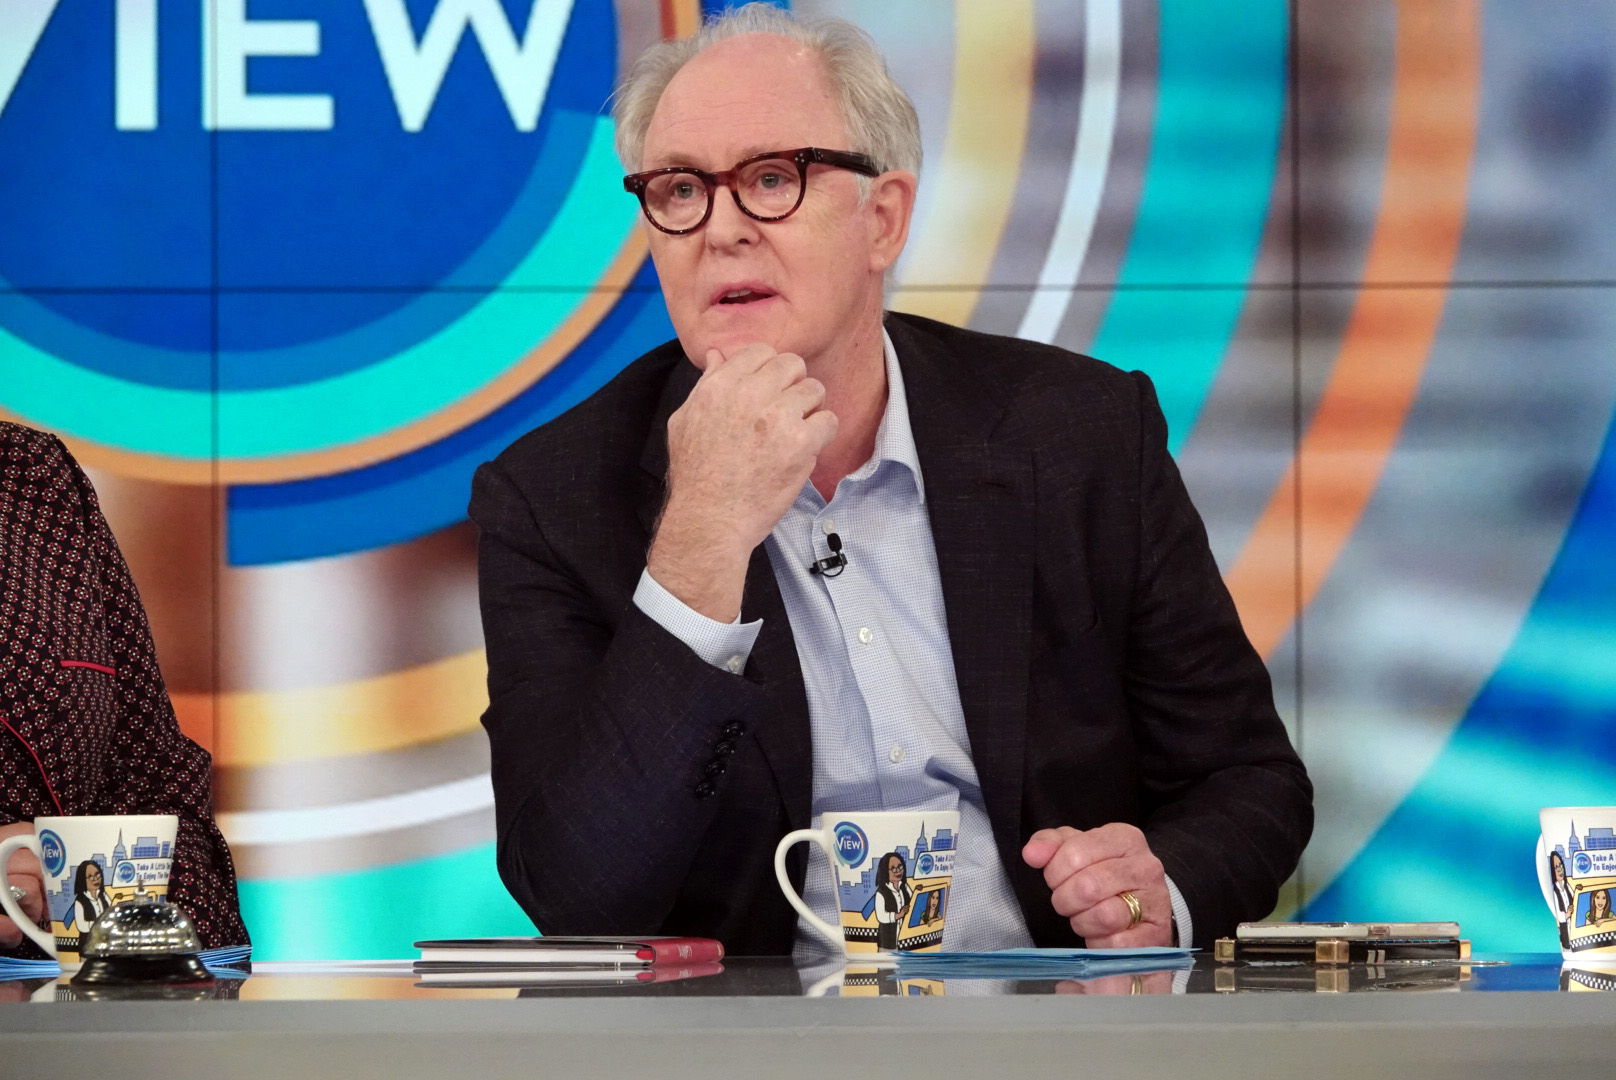 John Lithgow on portrayal of Roger Ailes in Bombshell film on The View First really great movie of the #MeToo era